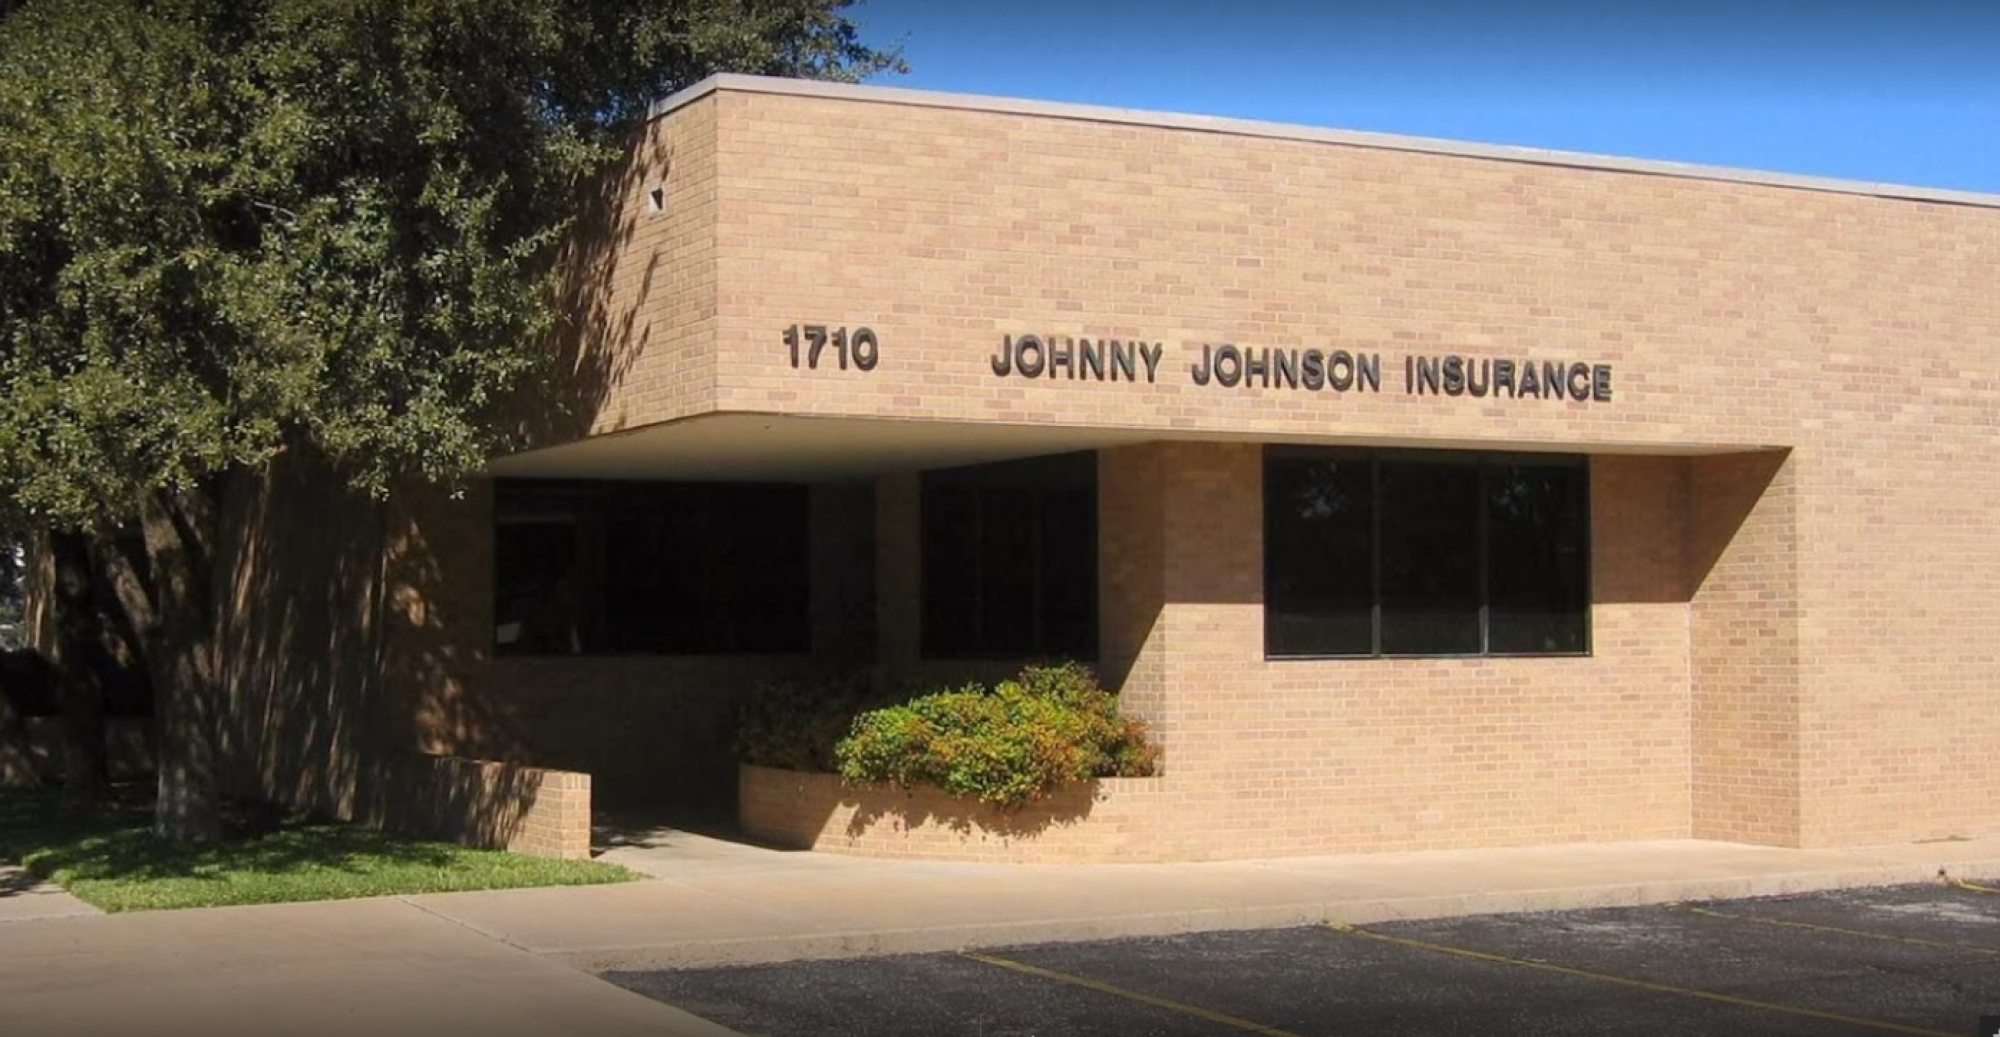 Johnny Johnson Insurance - About Us